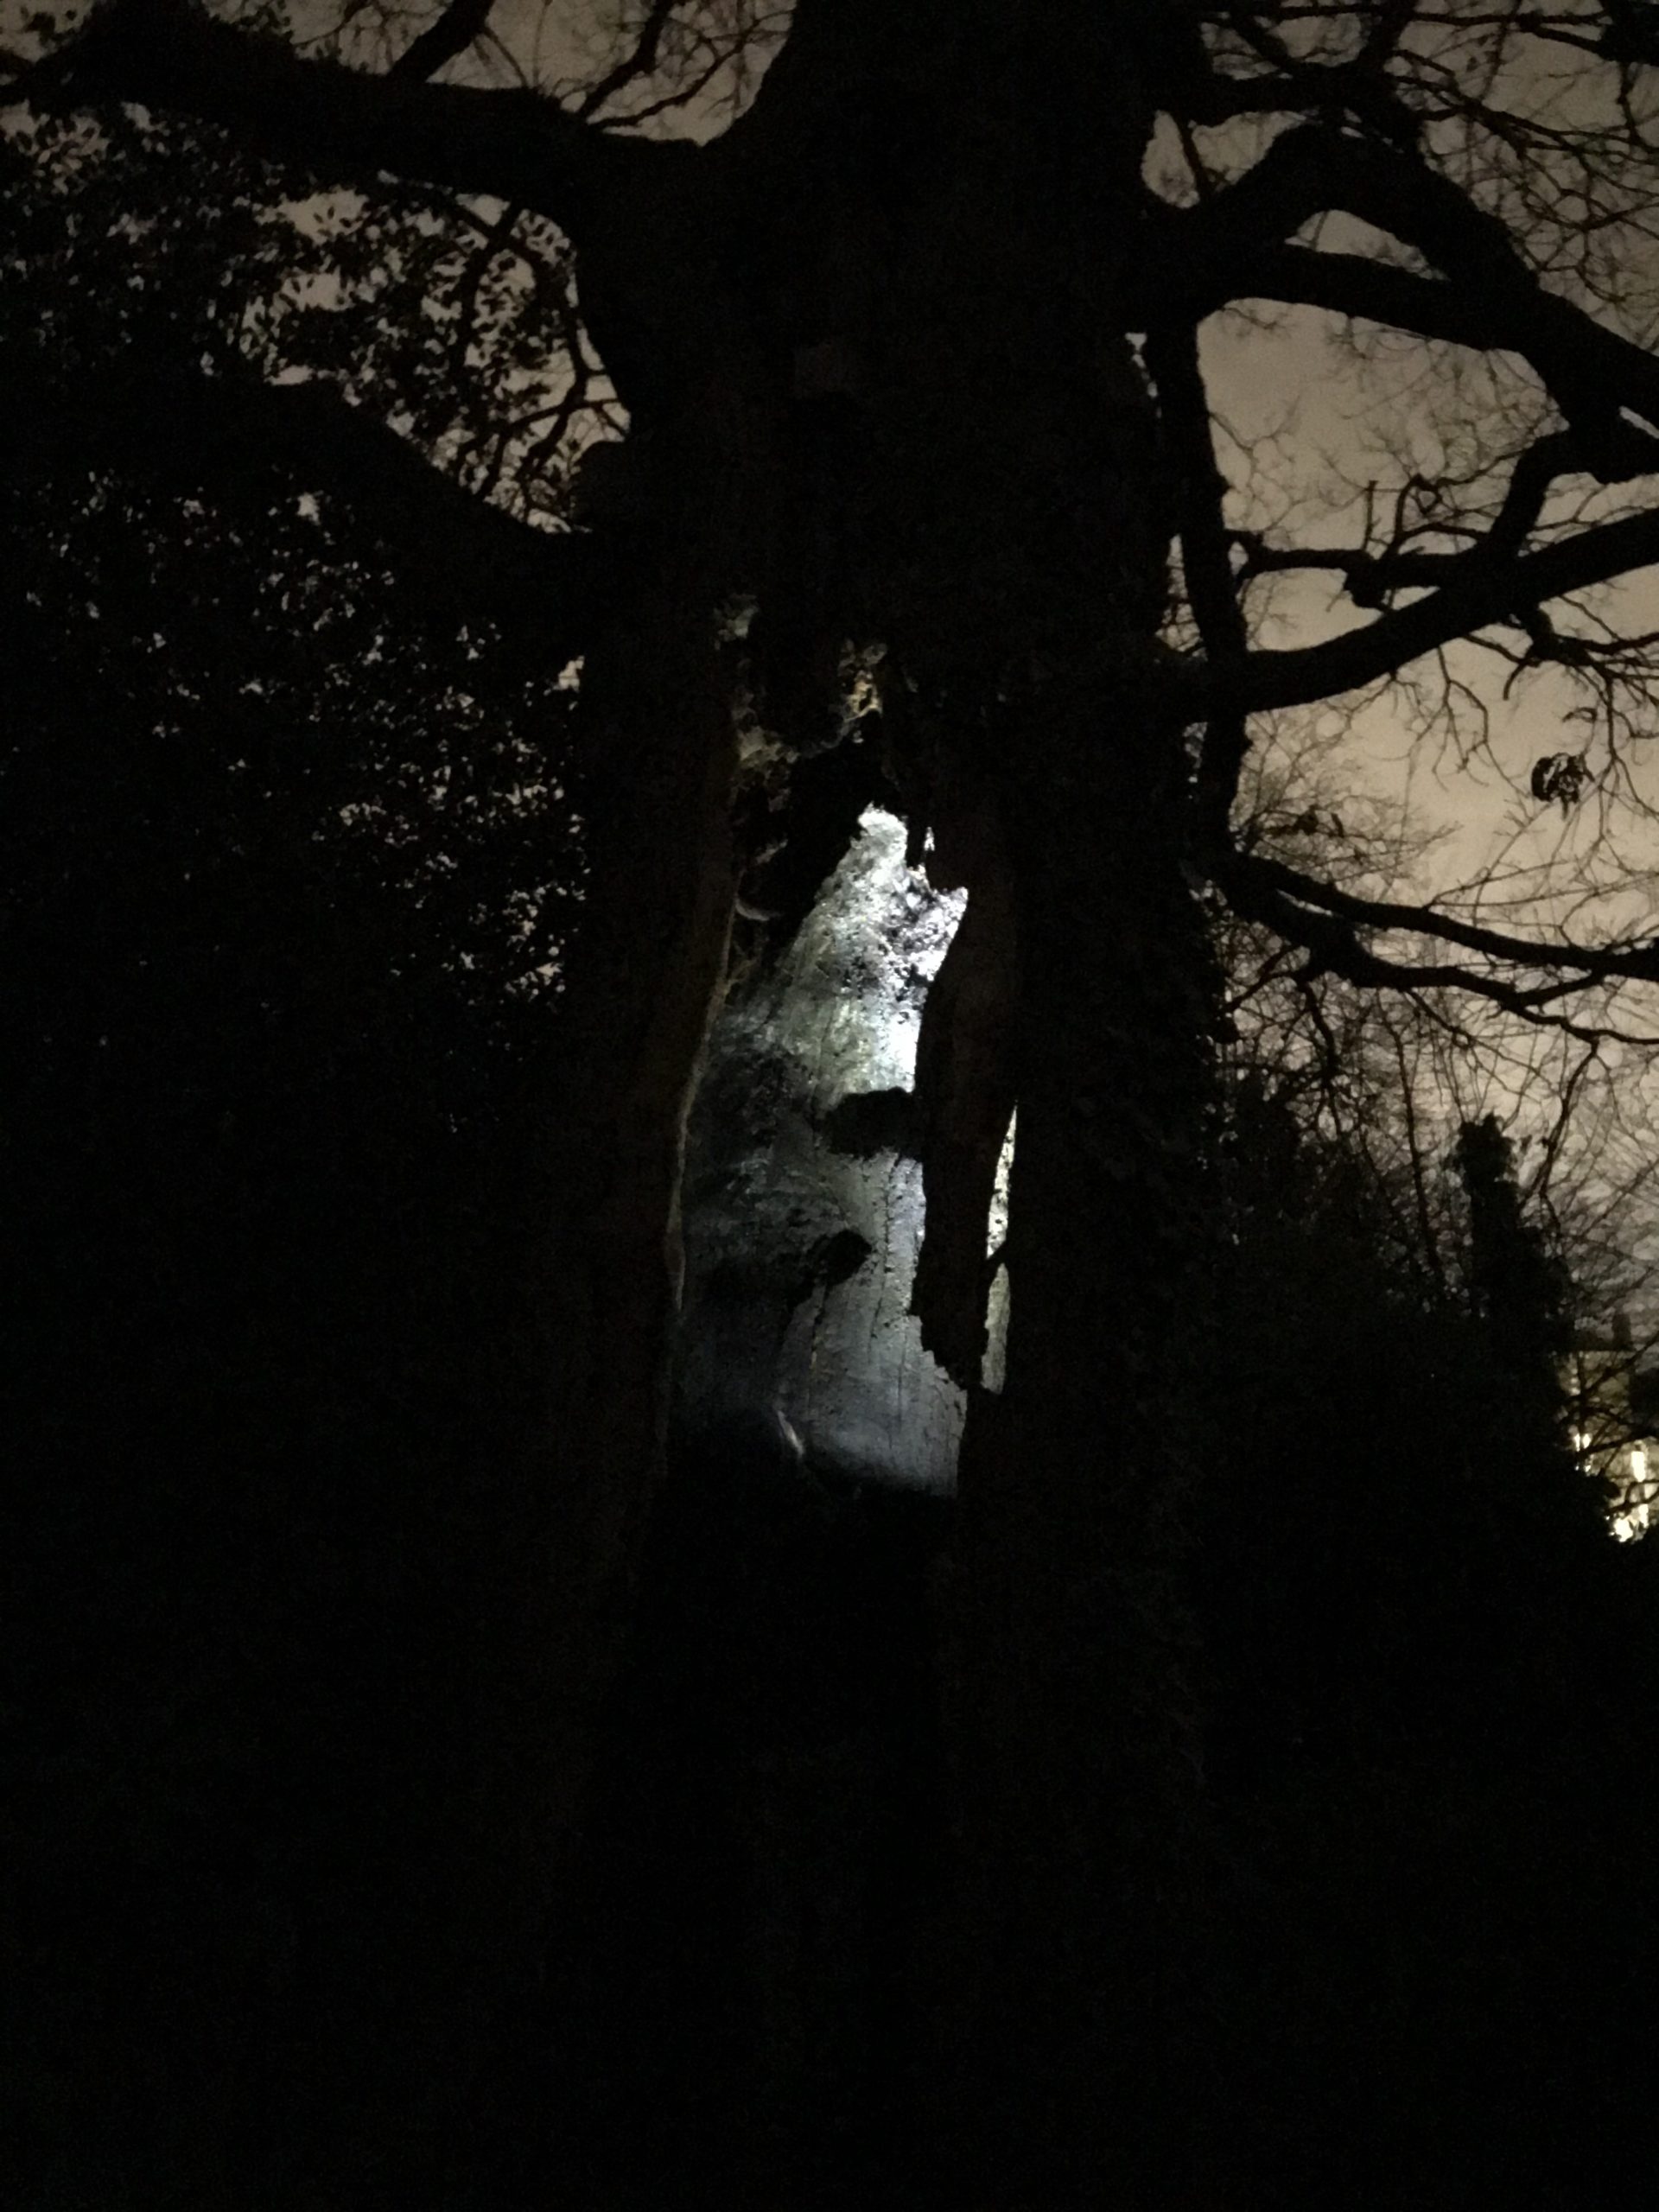 large tree silhouetted against the night sky with a light shining inside of it